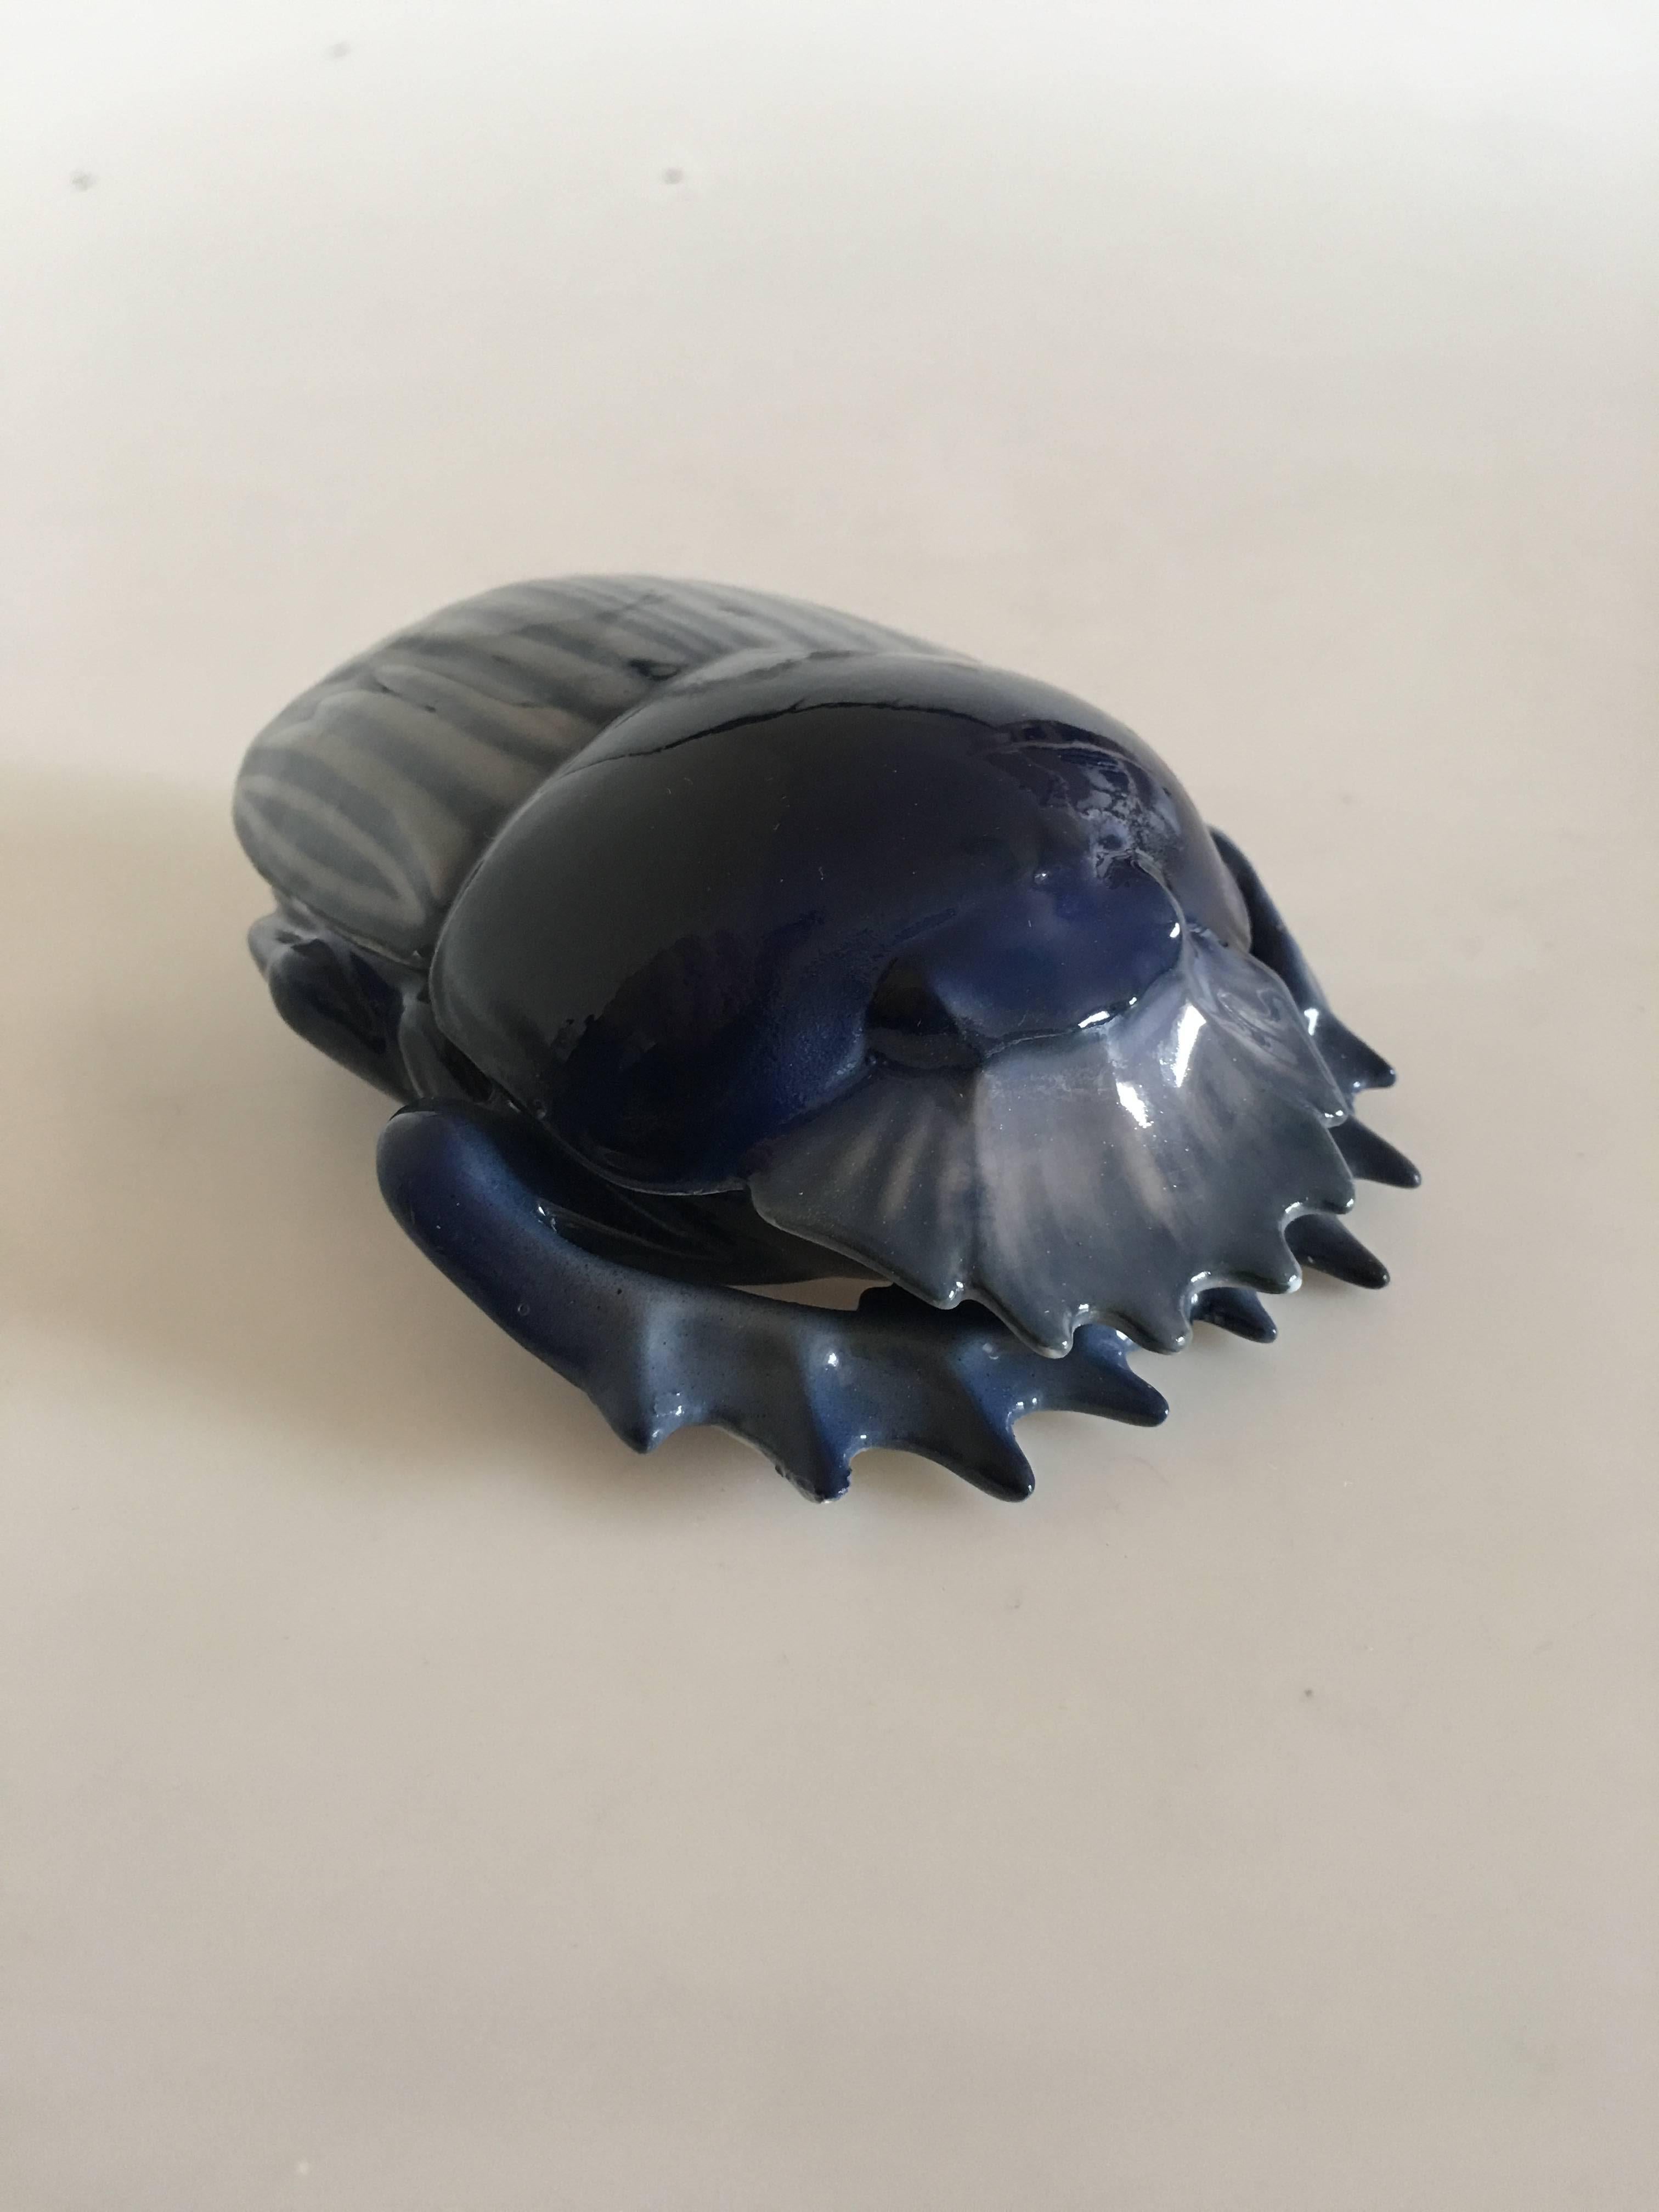 Royal Copenhagen scarab shaped lidded dish #31/16. In somewhat mate and shiny blue toned glazing finish. In beautiful whole condition. Measures: 12 x 10 cm (4 32/32